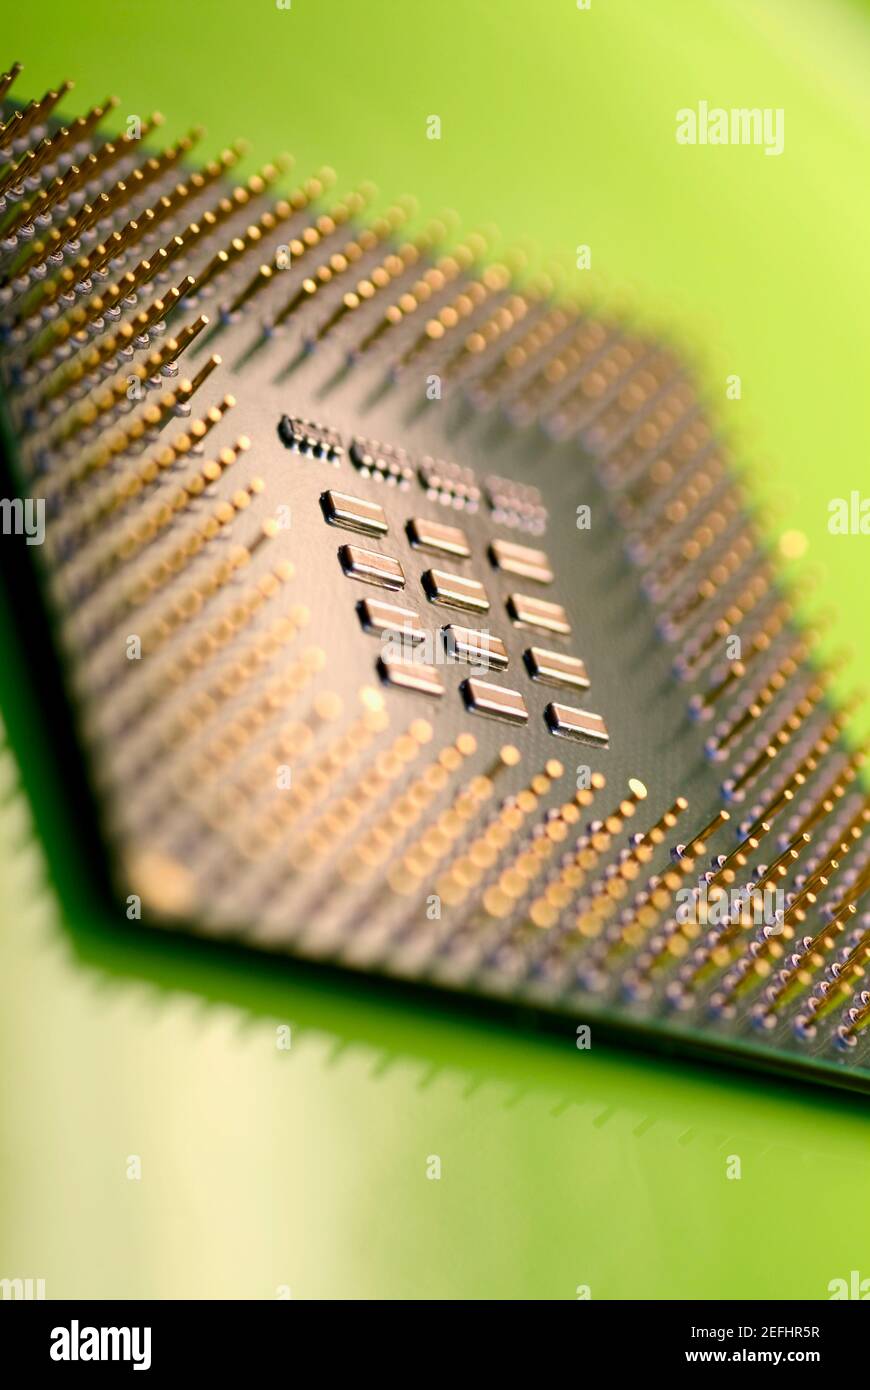 Close-up of a computer chip Stock Photo